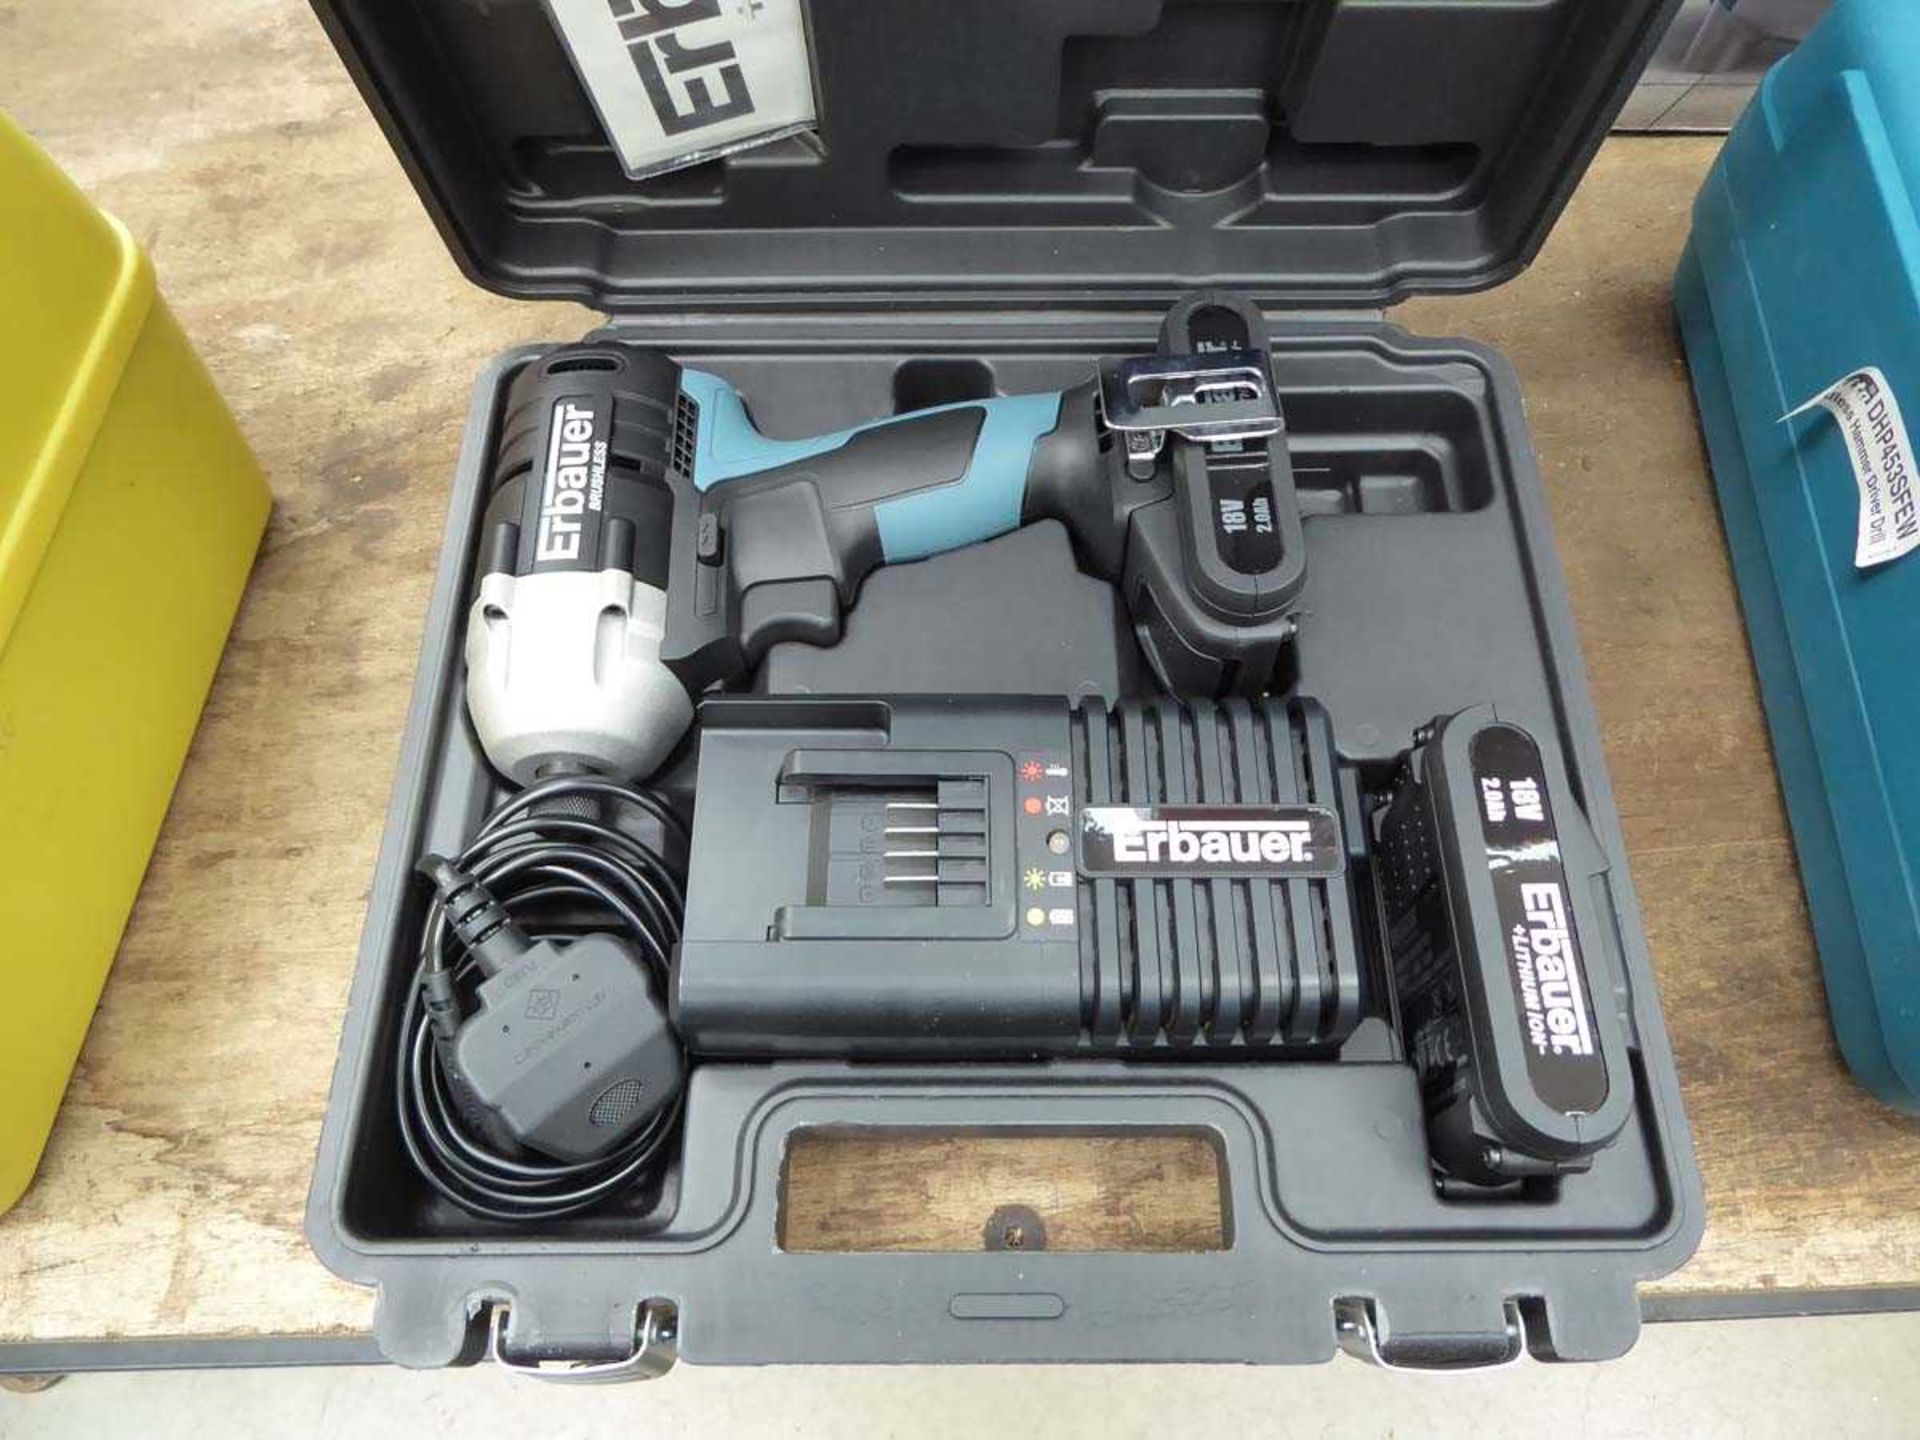 Erbauer battery drill with 2 batteries and charger